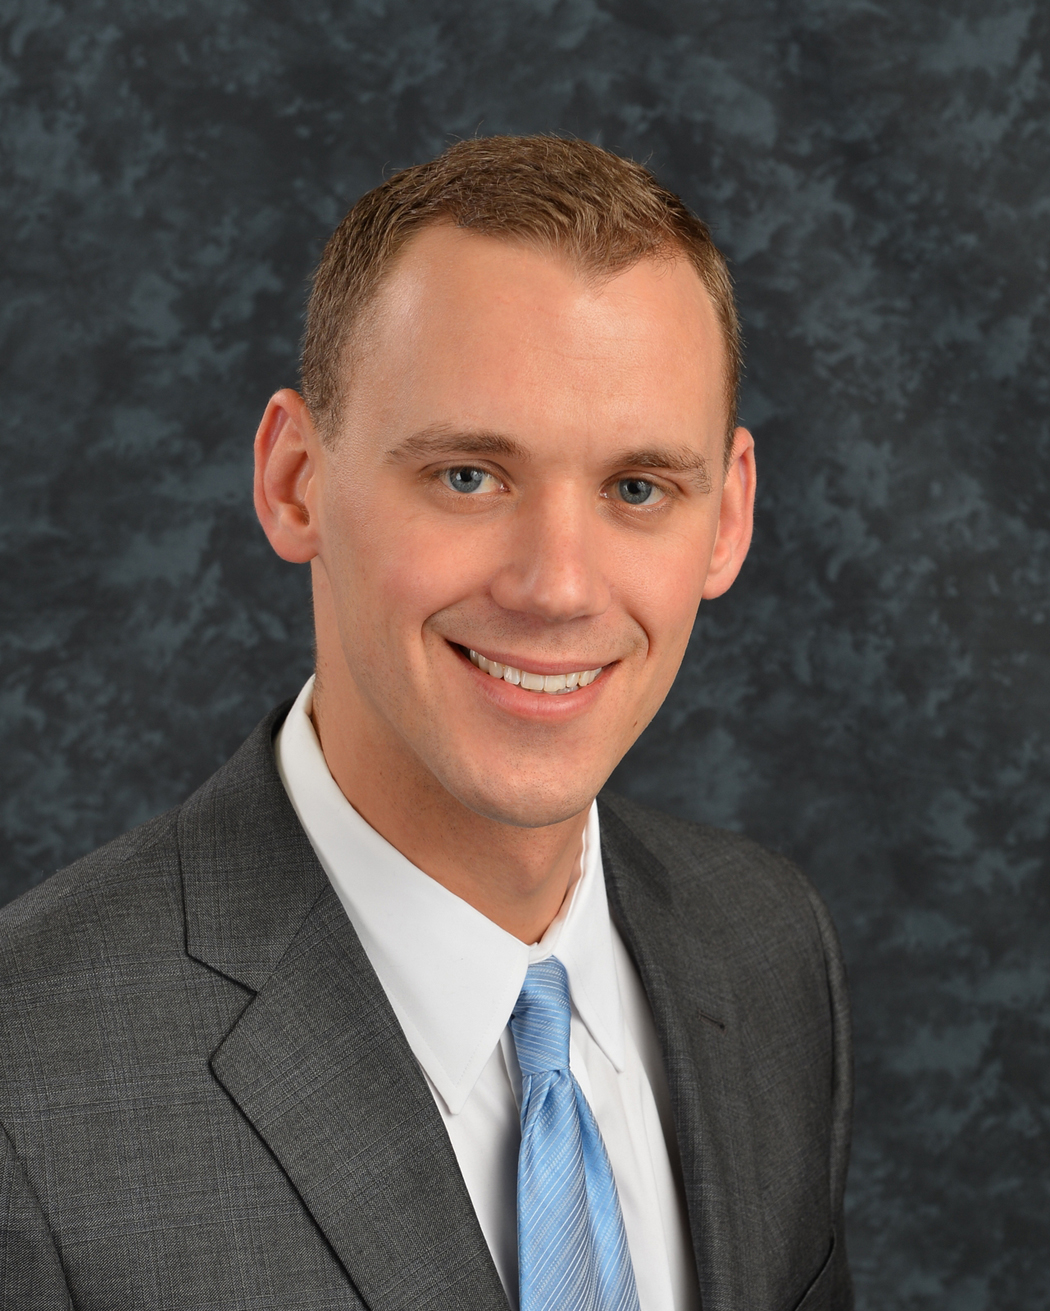 Jesse W. Kruse has joined Exsurco Medical as Sales & Training Specialist – Tissue Banks.